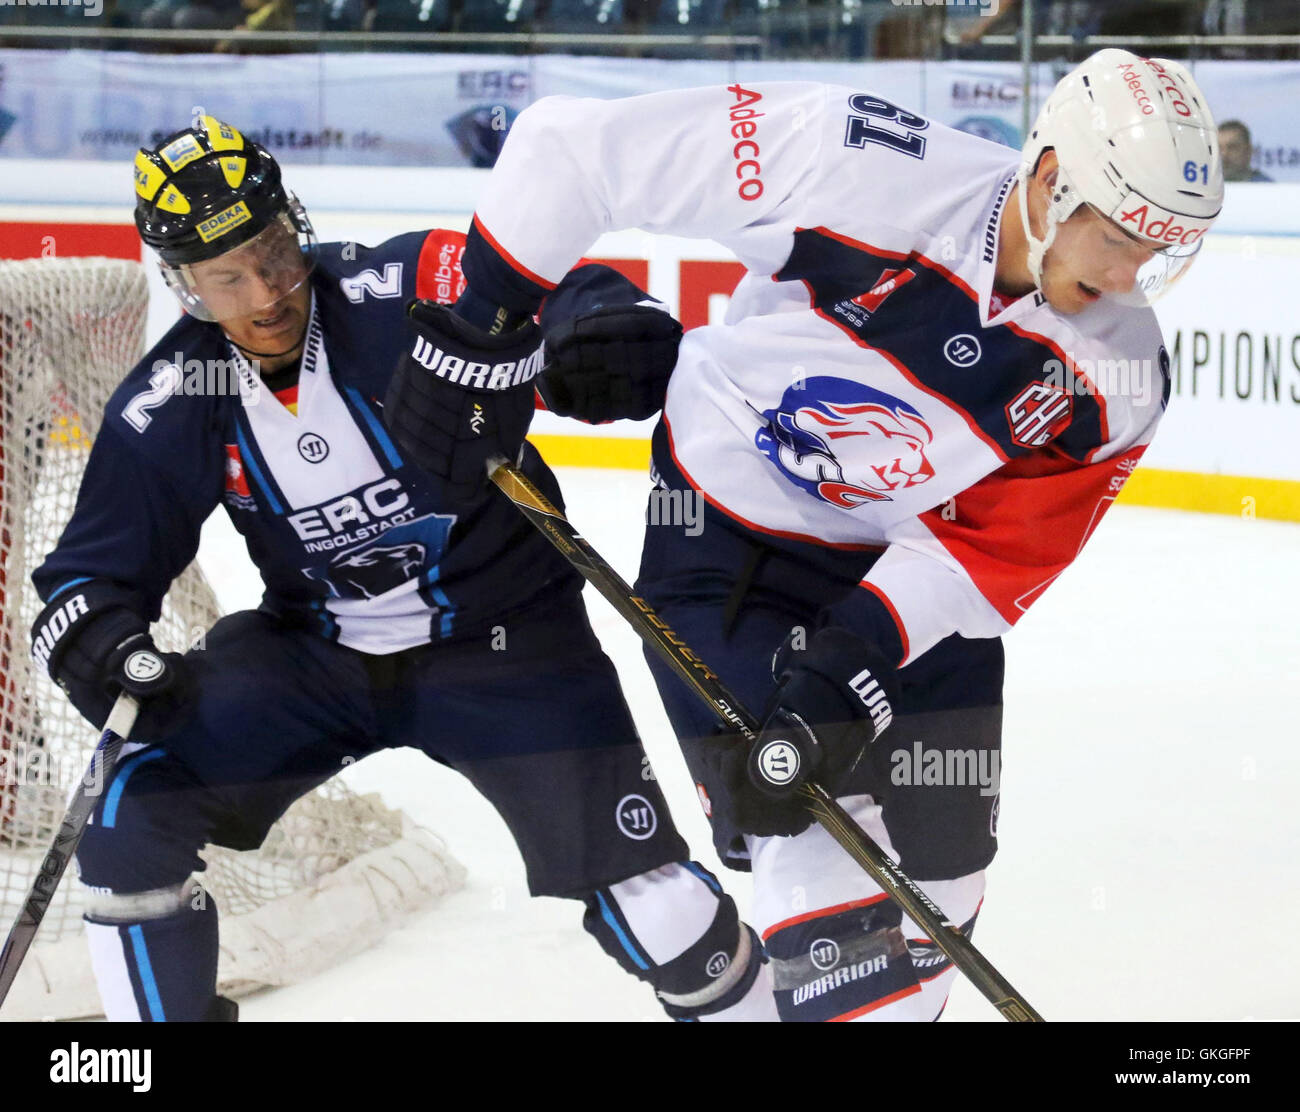 Ingolstadt, Bavaria, Germany. 20th Aug, 2016. from left Patrick MCNEILL (Ingolstadt/CAN), Fabrice HERZOG (Zuerich), .Champions Hockey League, ERC Ingolstadt vs ZSC Lions Zurich, Ingolstadt, Saturn Arena, August 20, 2016, matchday 2, the best 48 teams of 13 European hockey leagues play this season in the Champions Hockey League Credit:  Wolfgang Fehrmann/ZUMA Wire/Alamy Live News Stock Photo